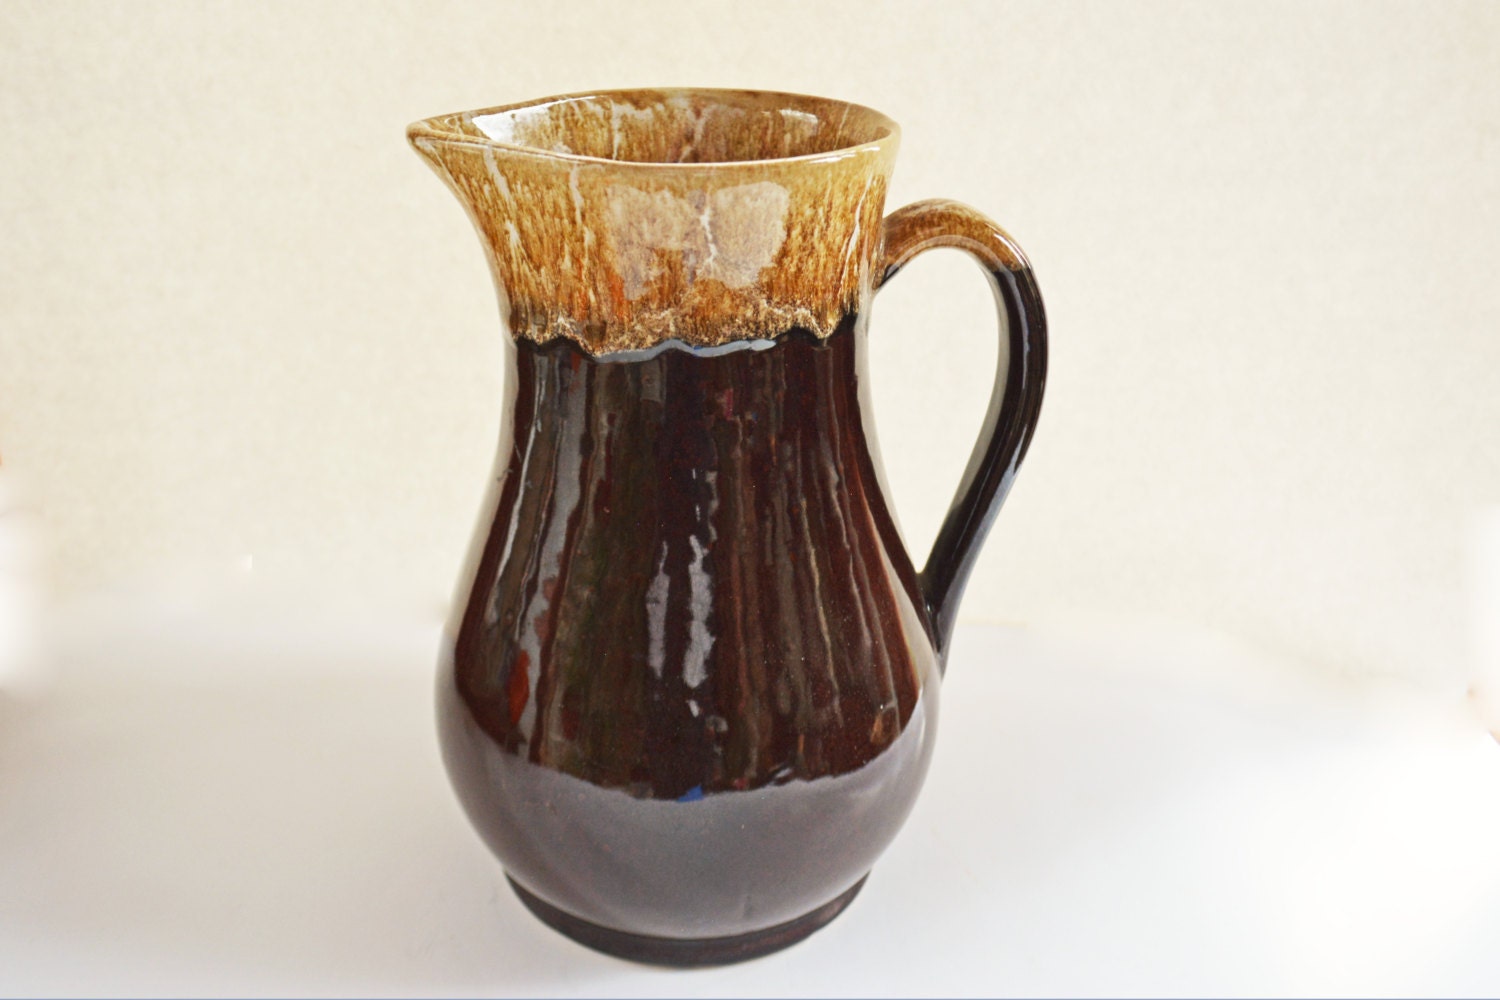 Roseville Pottery Pitcher, Vintage Brown Drip Pottery Water Pitcher